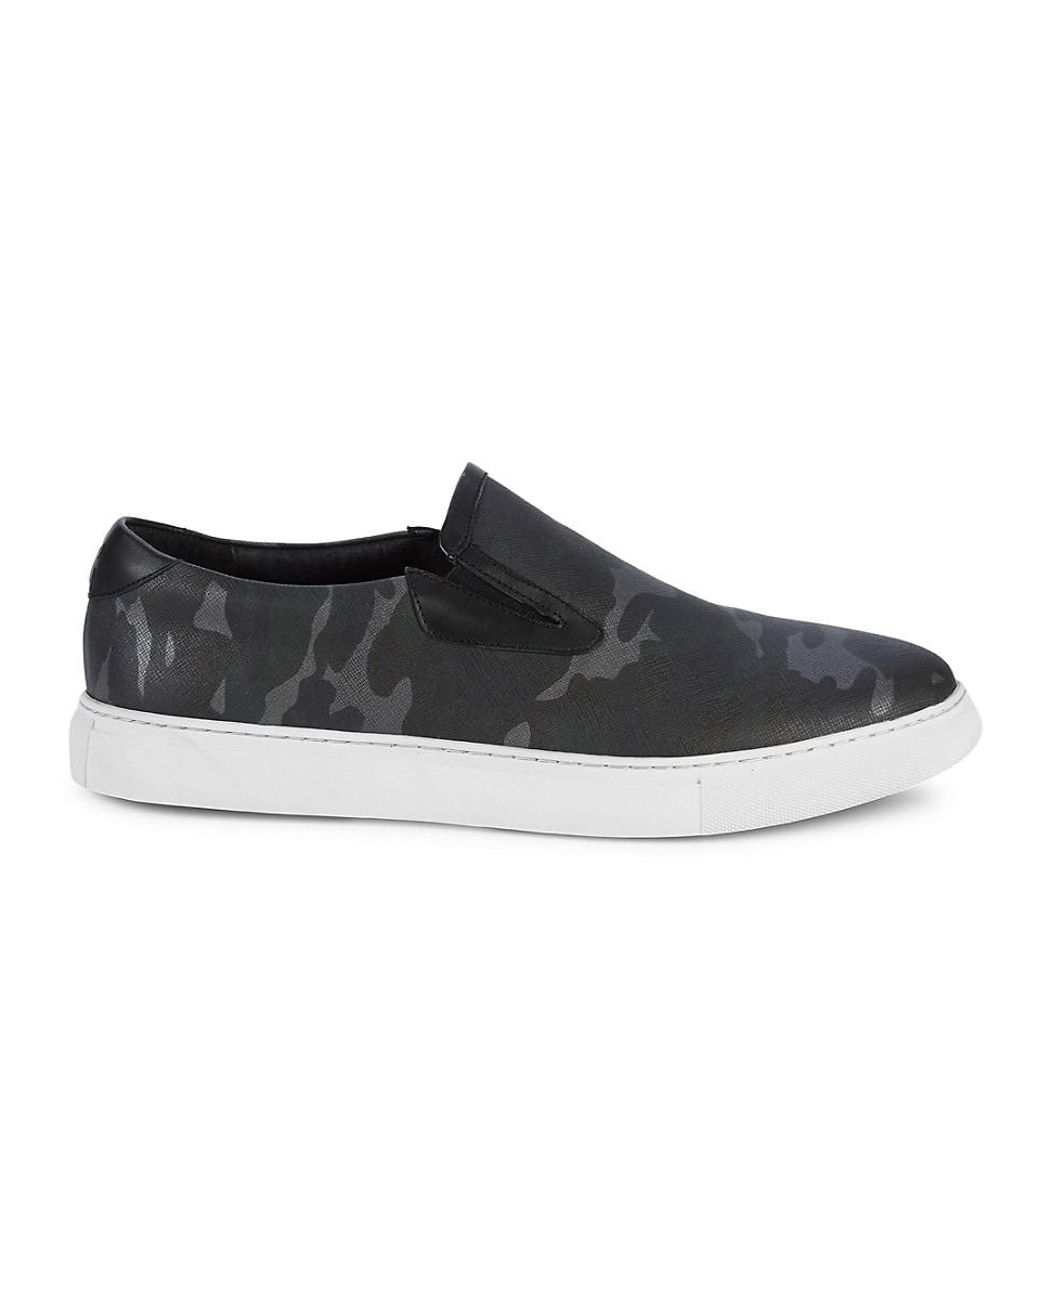 Robert Graham Buster Camouflage Leather Slip-on Sneakers for Men | Lyst